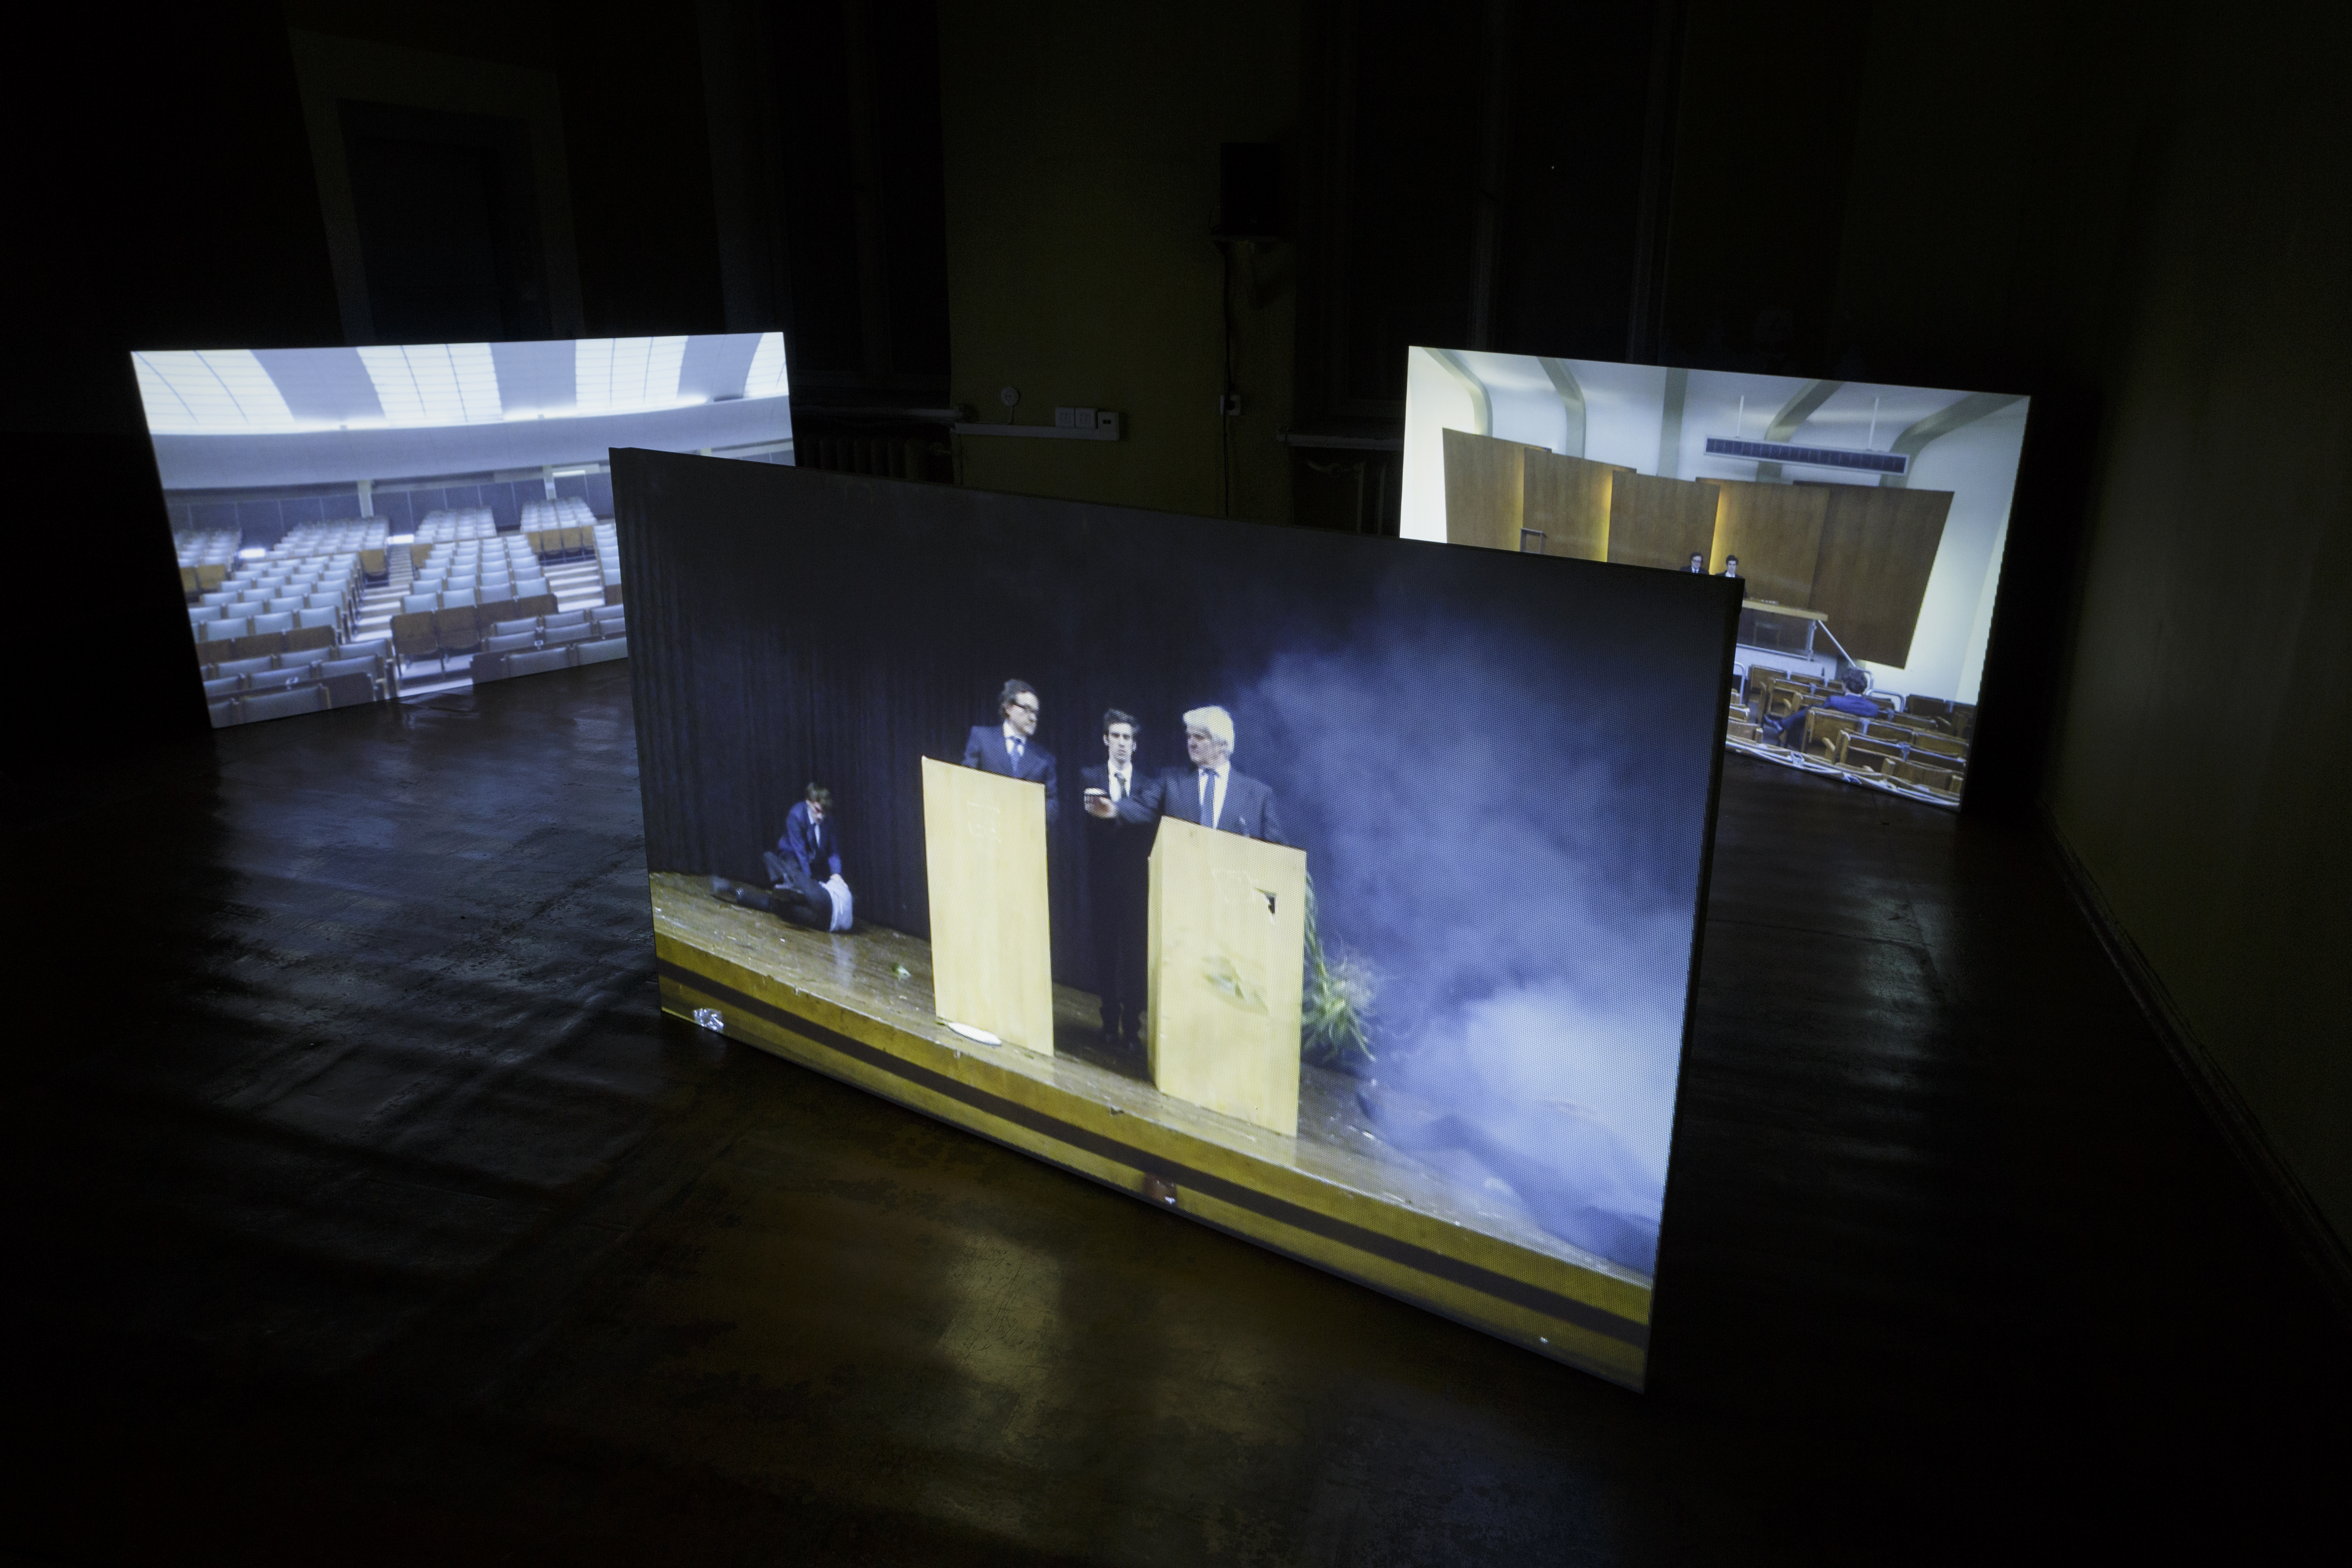 Ginta Tinte Vasermane, Supportive Structures, 2016, 4-channel video installation